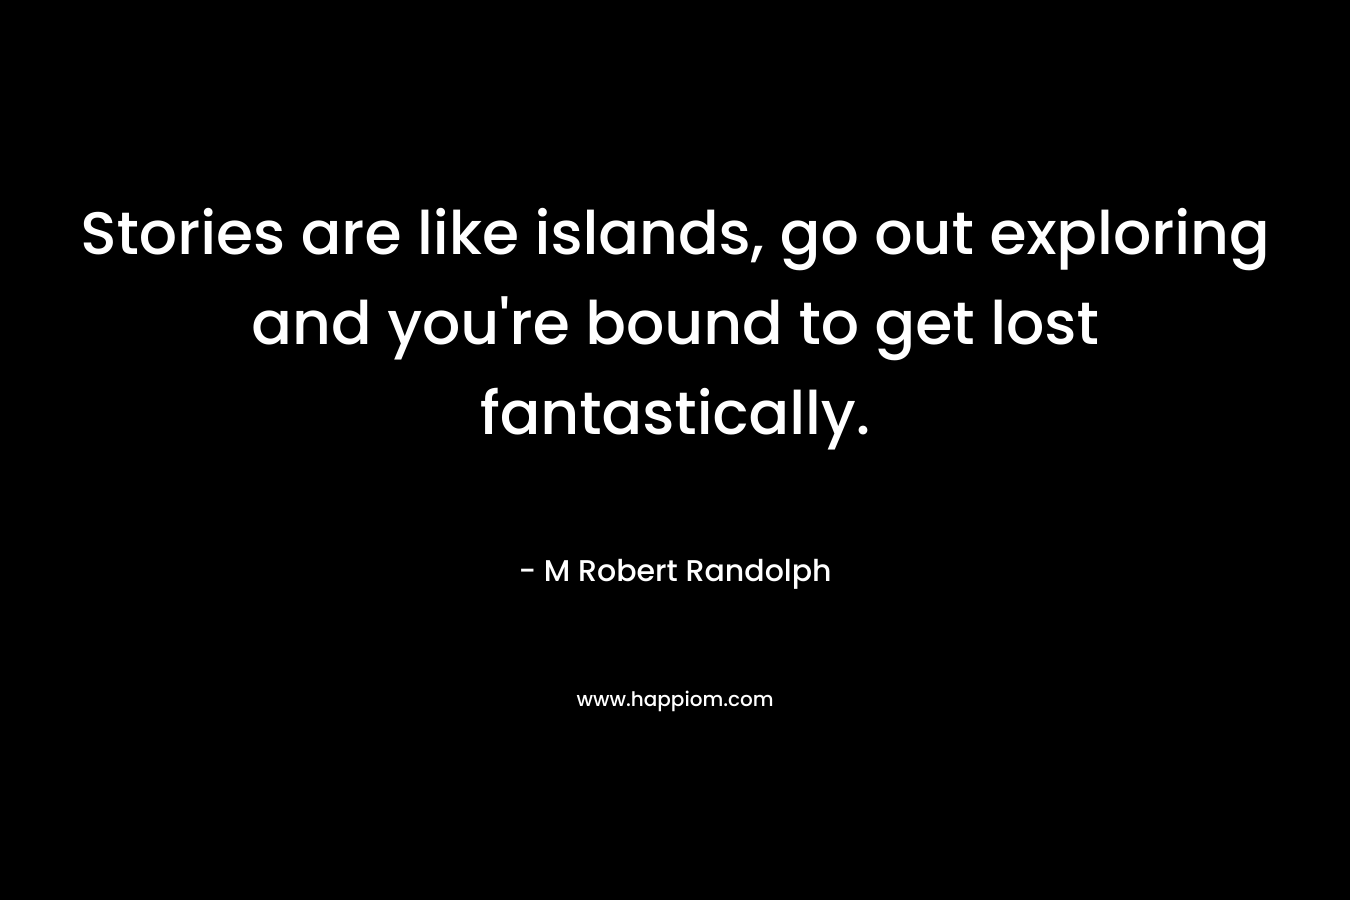 Stories are like islands, go out exploring and you’re bound to get lost fantastically. – M Robert Randolph